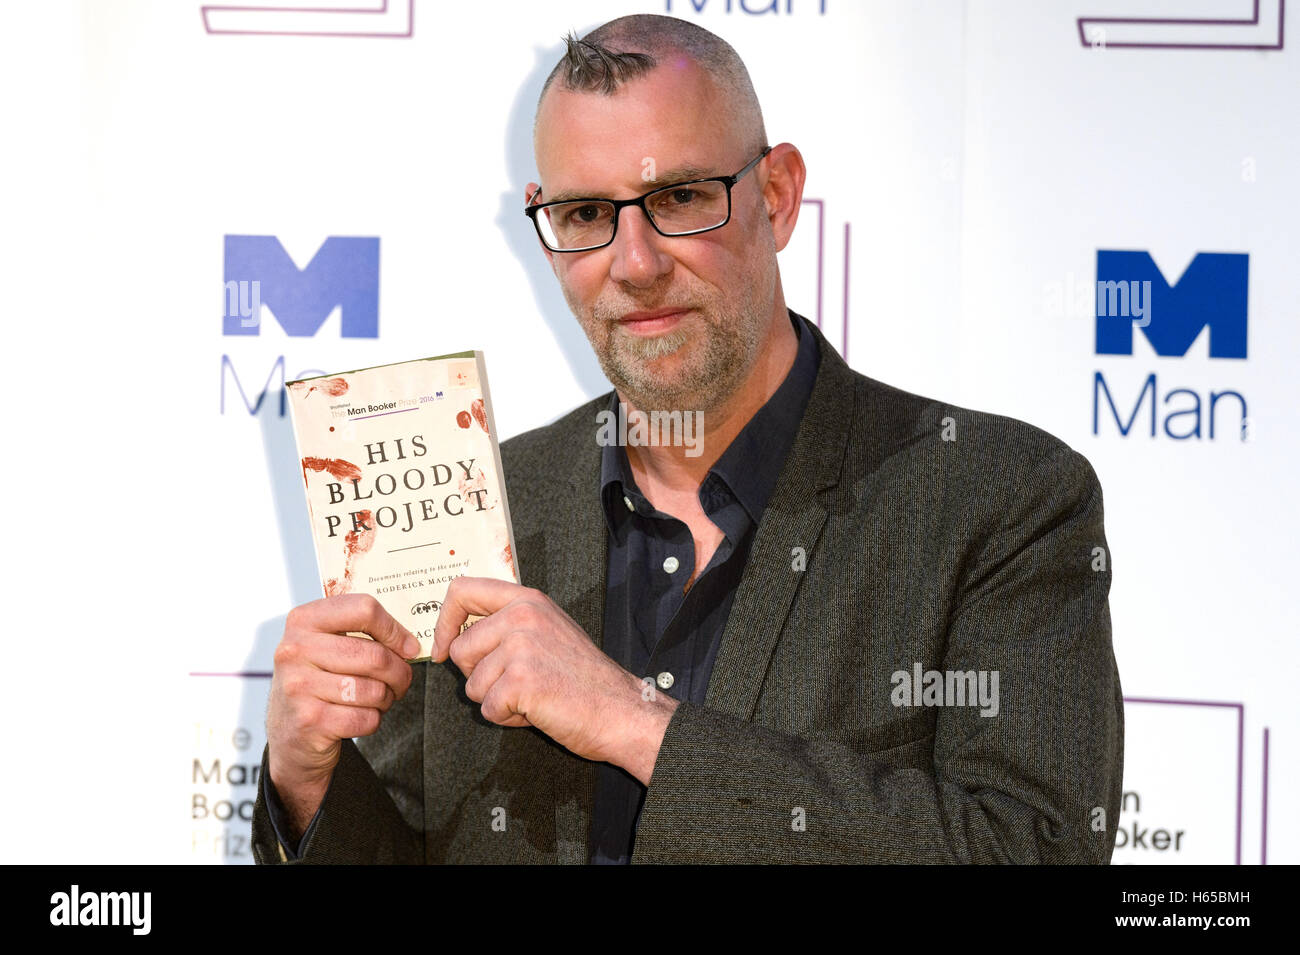 London, UK. 24th Oct, 2016. Author Graeme Macrae Burnet with his book 'His Bloody Project' attends the Man Booker Prize for Fiction photocall. London, UK. Credit:  Raymond Tang/Alamy Live News Stock Photo